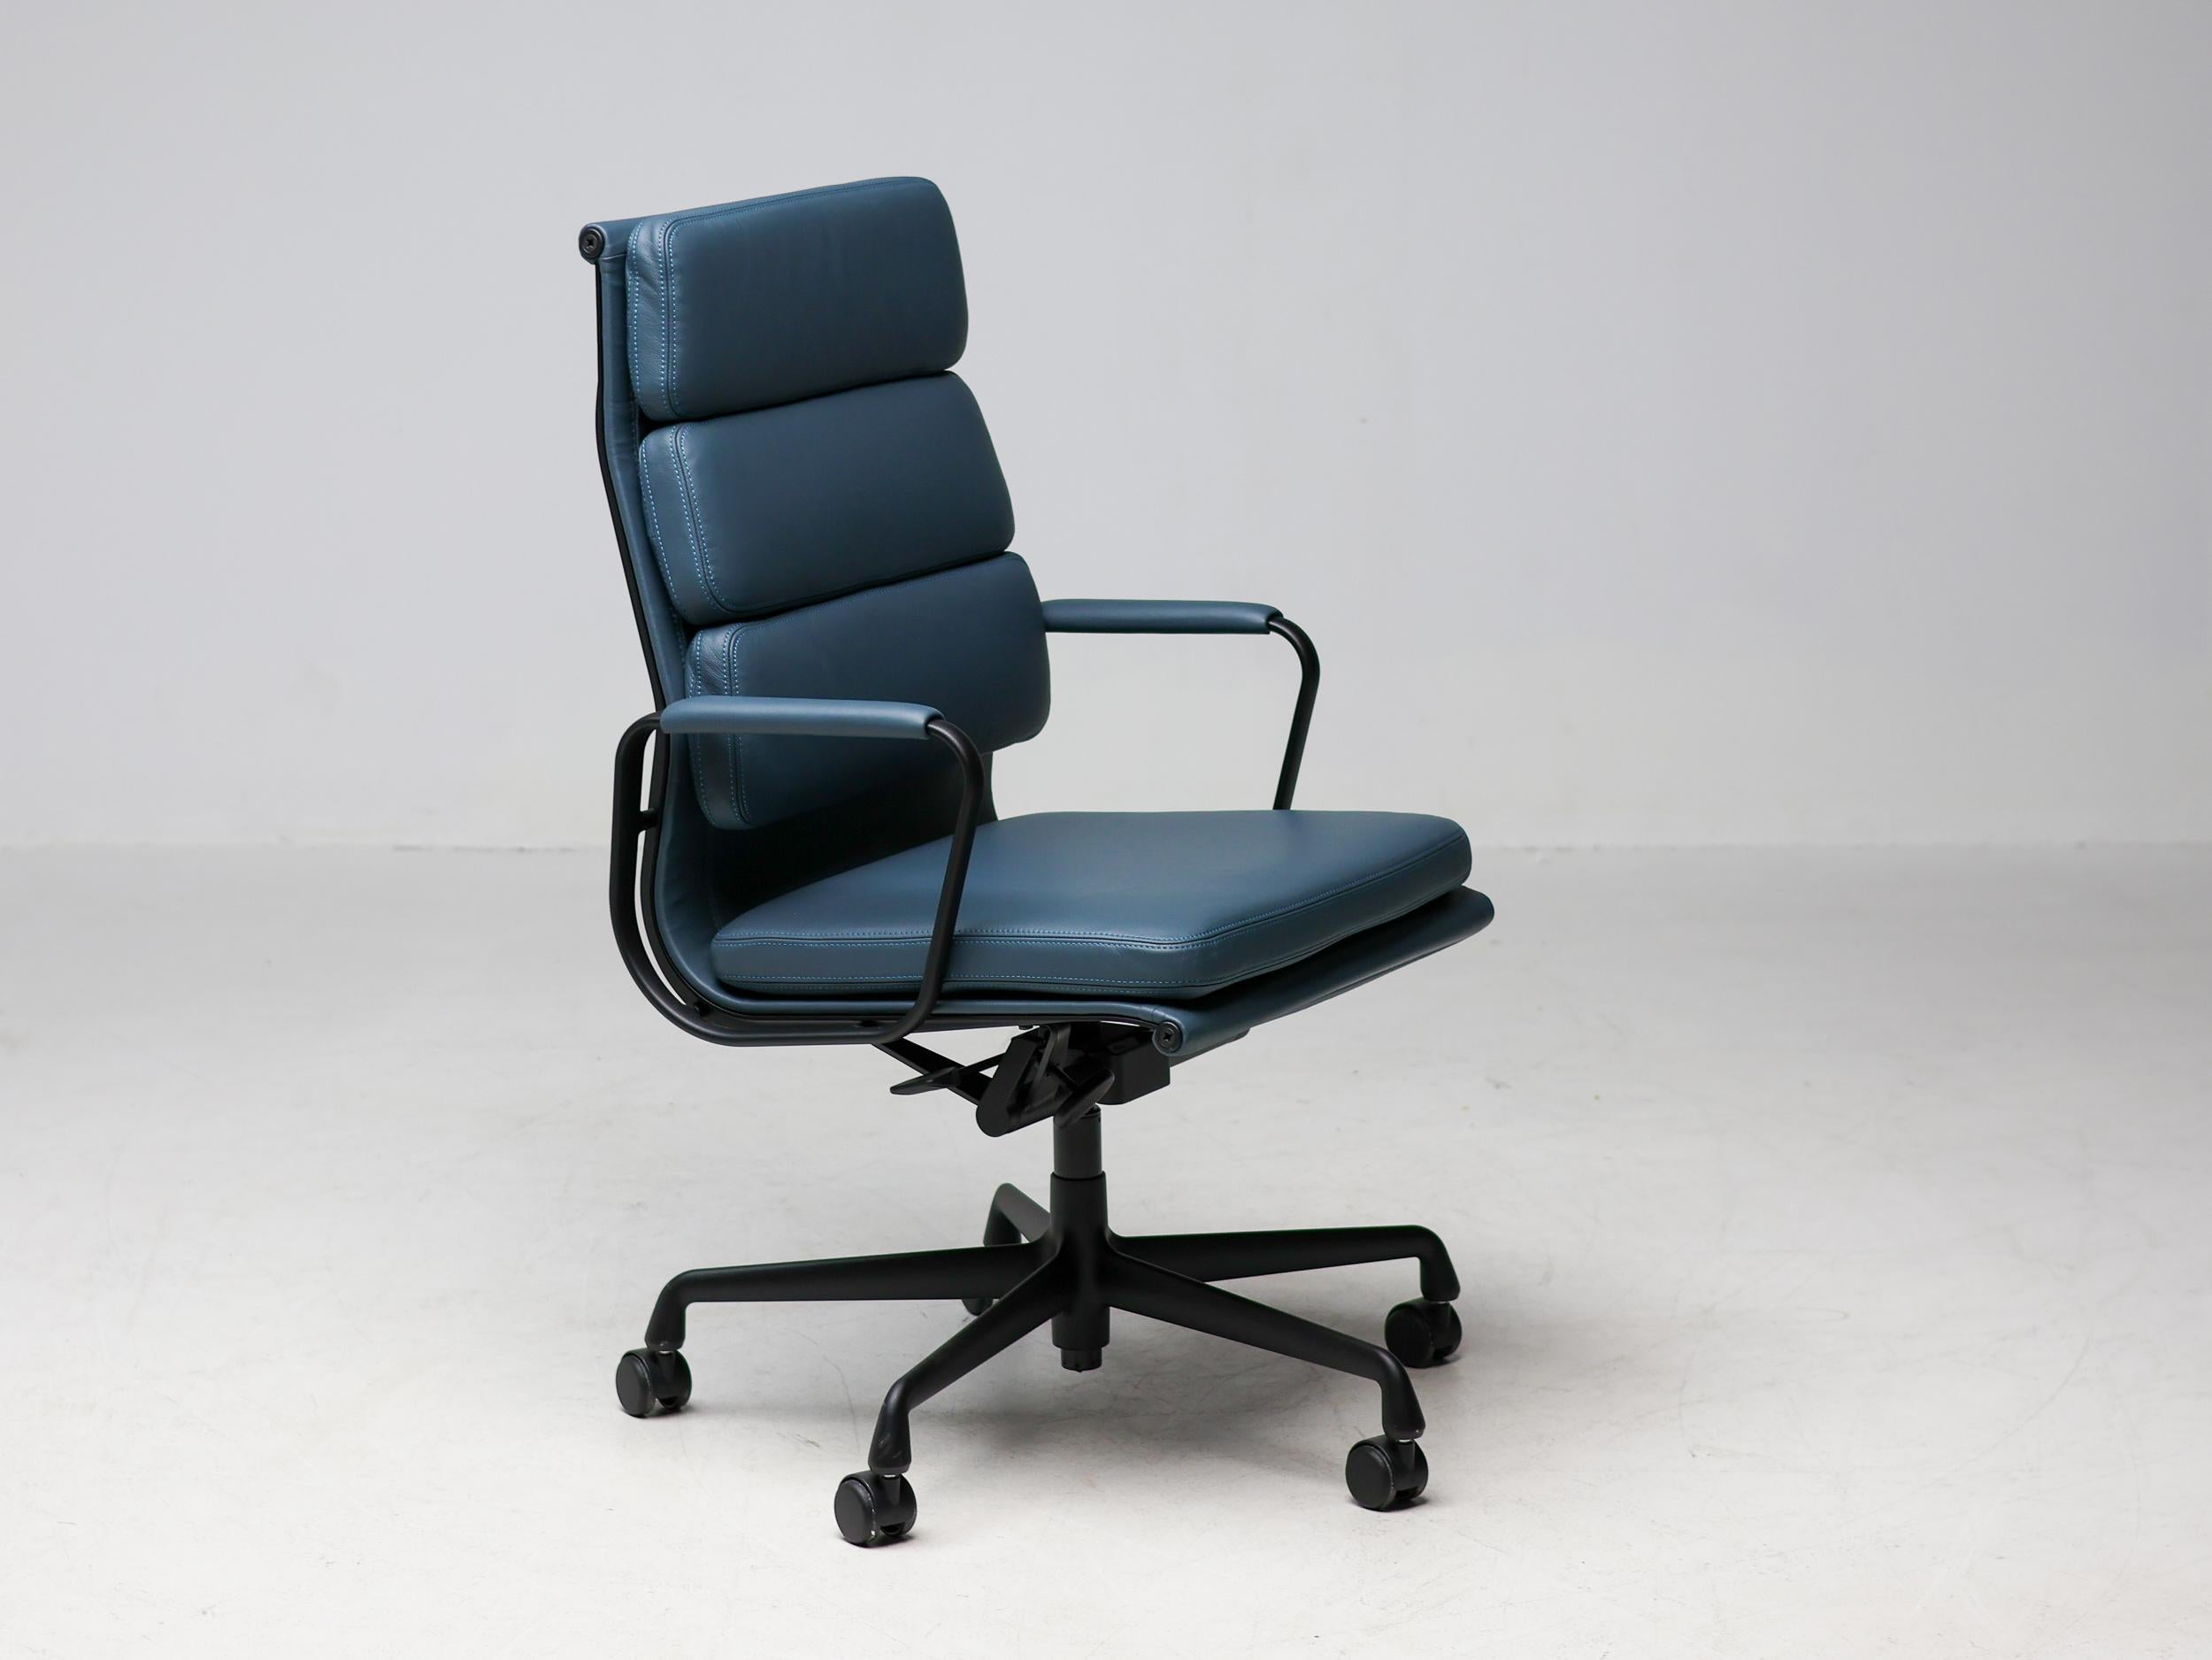 Aluminum Bespoke Charles & Ray Eames Smoke Blue Leather EA219 Desk Chair For Sale